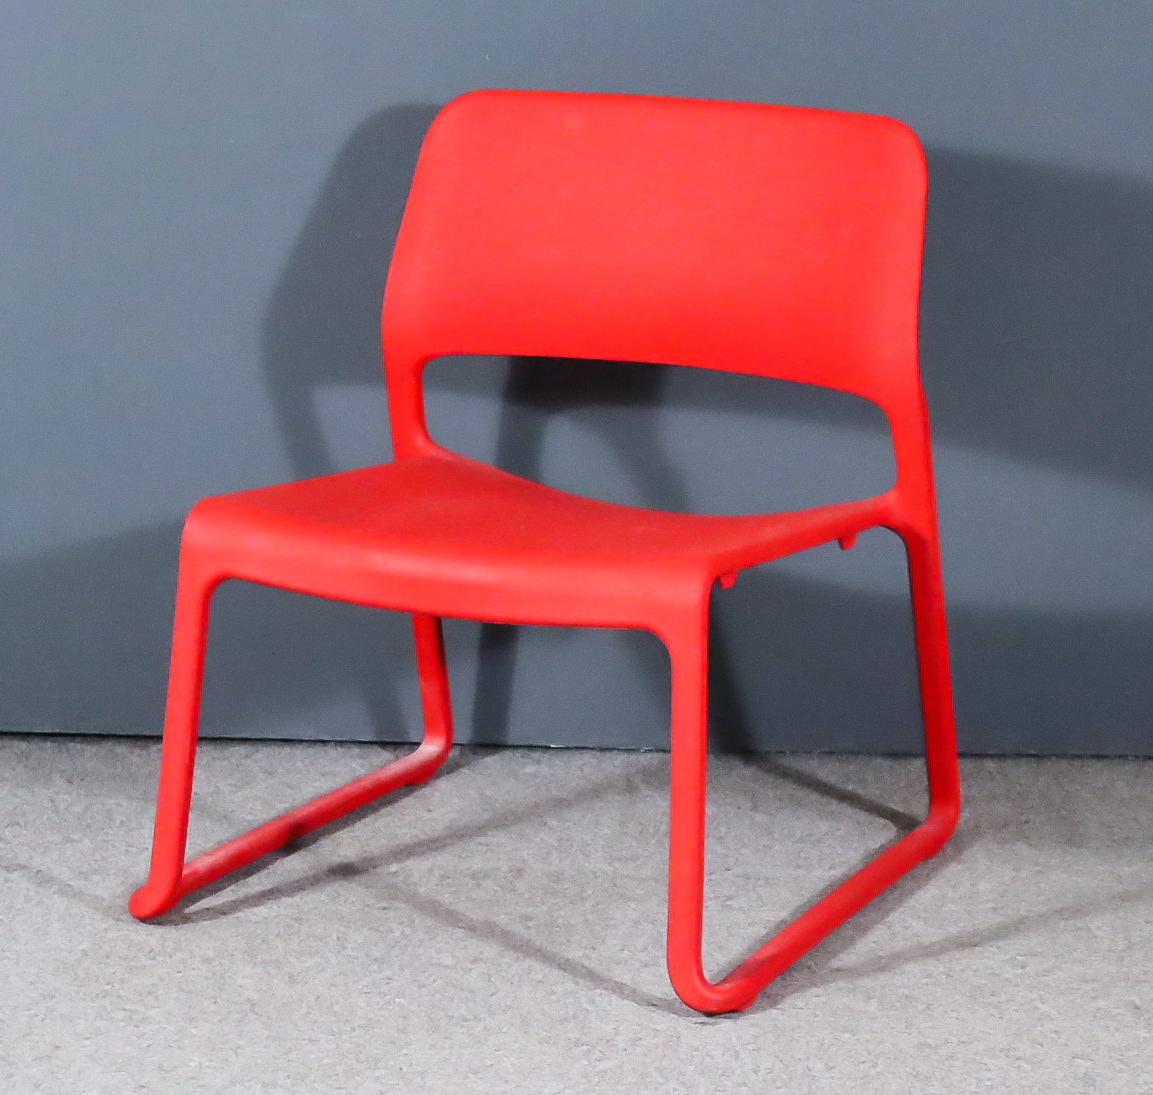 After Donal Chadwick (born 1936) - Knoll "Spark Series" Red Plastic Chair